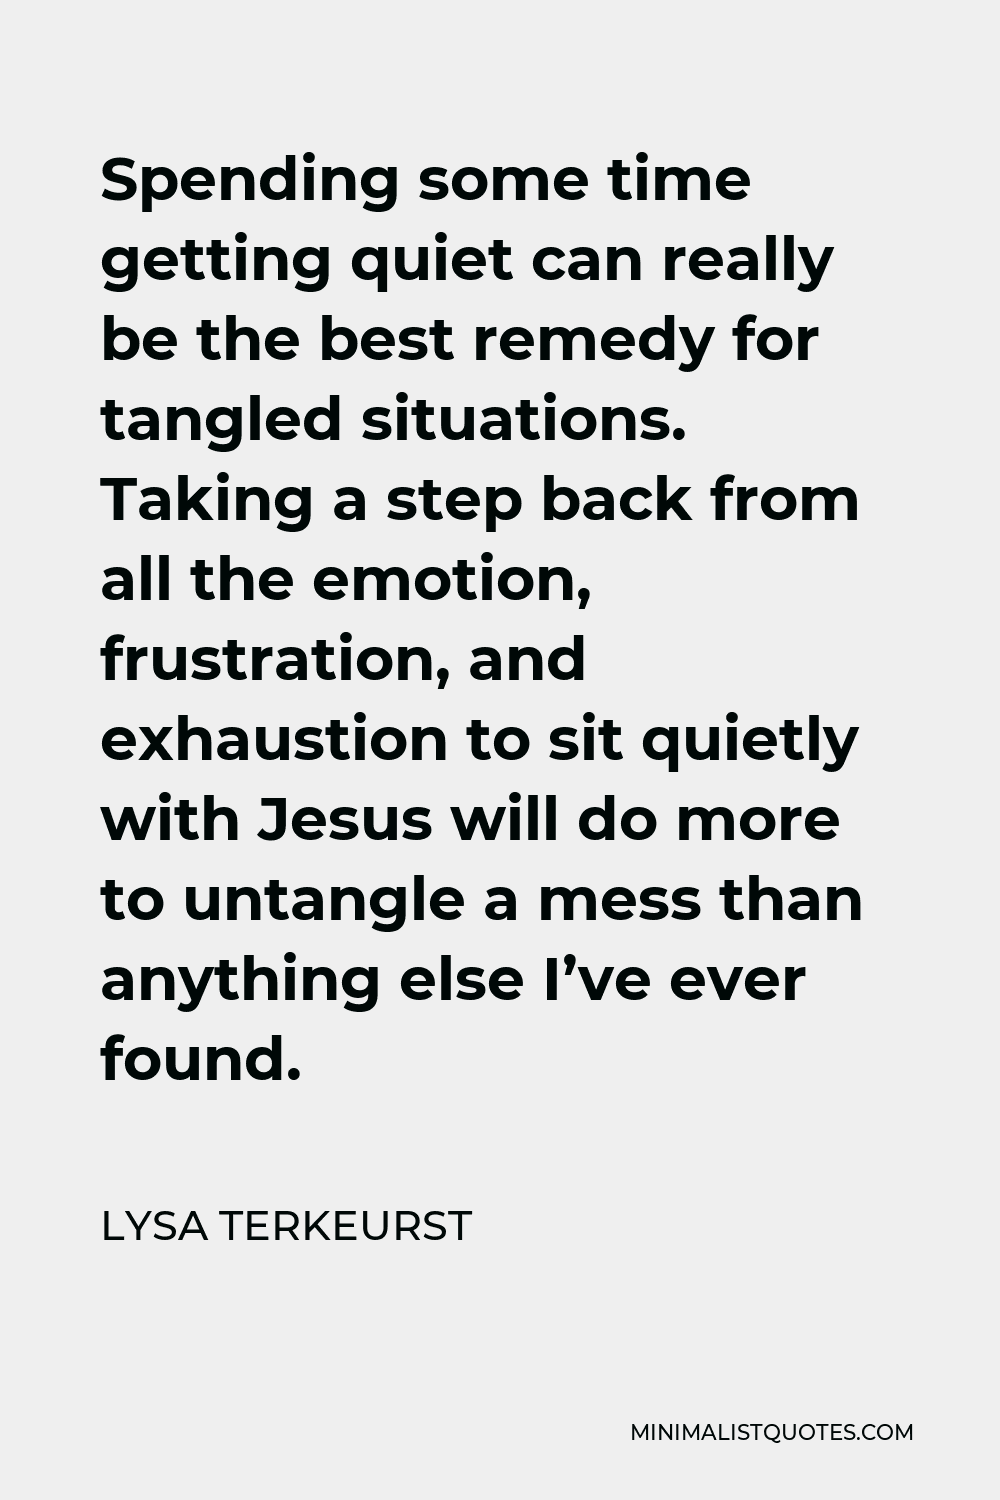 Lysa TerKeurst Quote - Spending some time getting quiet can really be the best remedy for tangled situations. Taking a step back from all the emotion, frustration, and exhaustion to sit quietly with Jesus will do more to untangle a mess than anything else I’ve ever found.